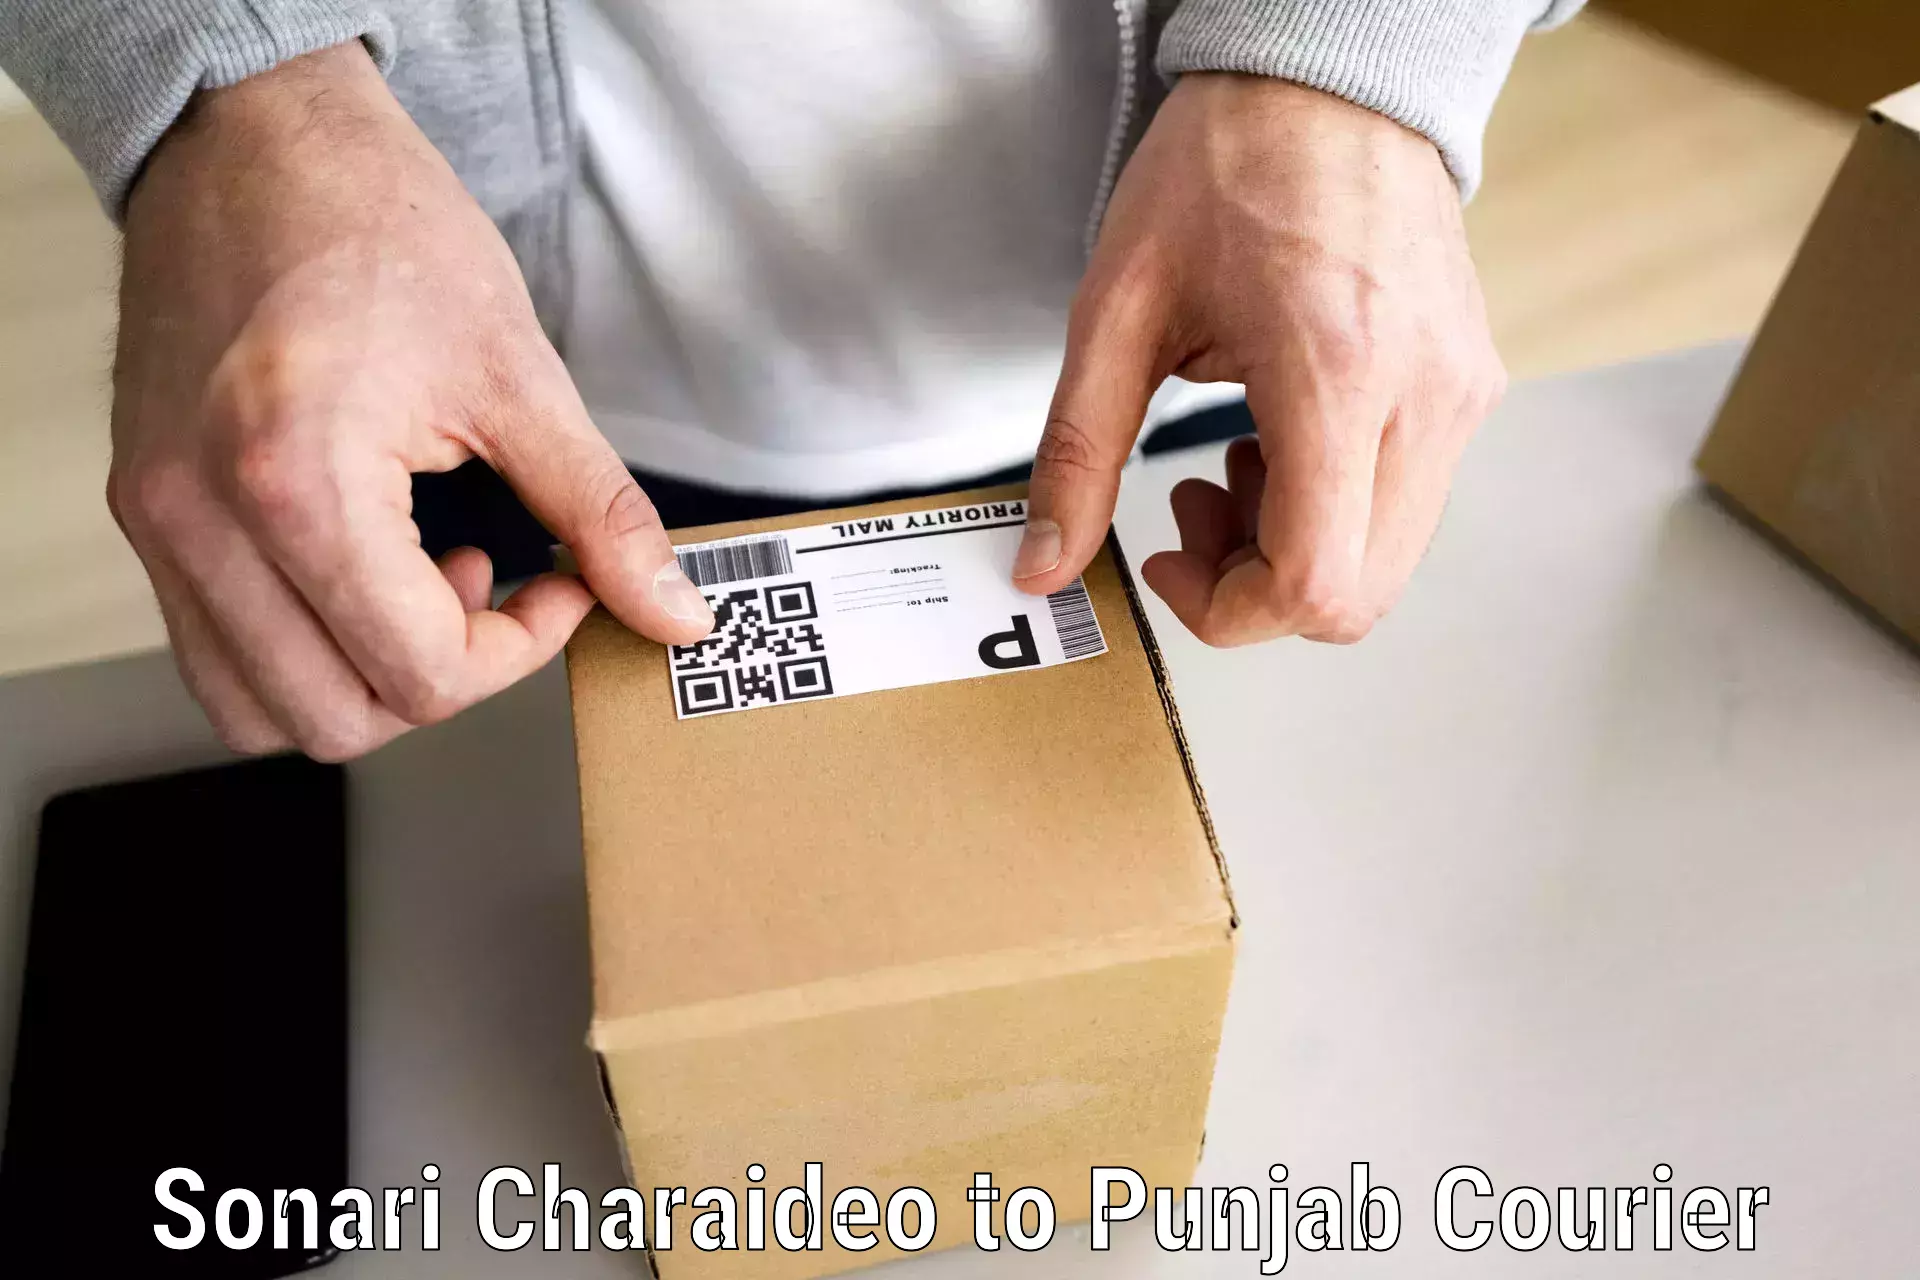 Full home relocation services Sonari Charaideo to Punjab